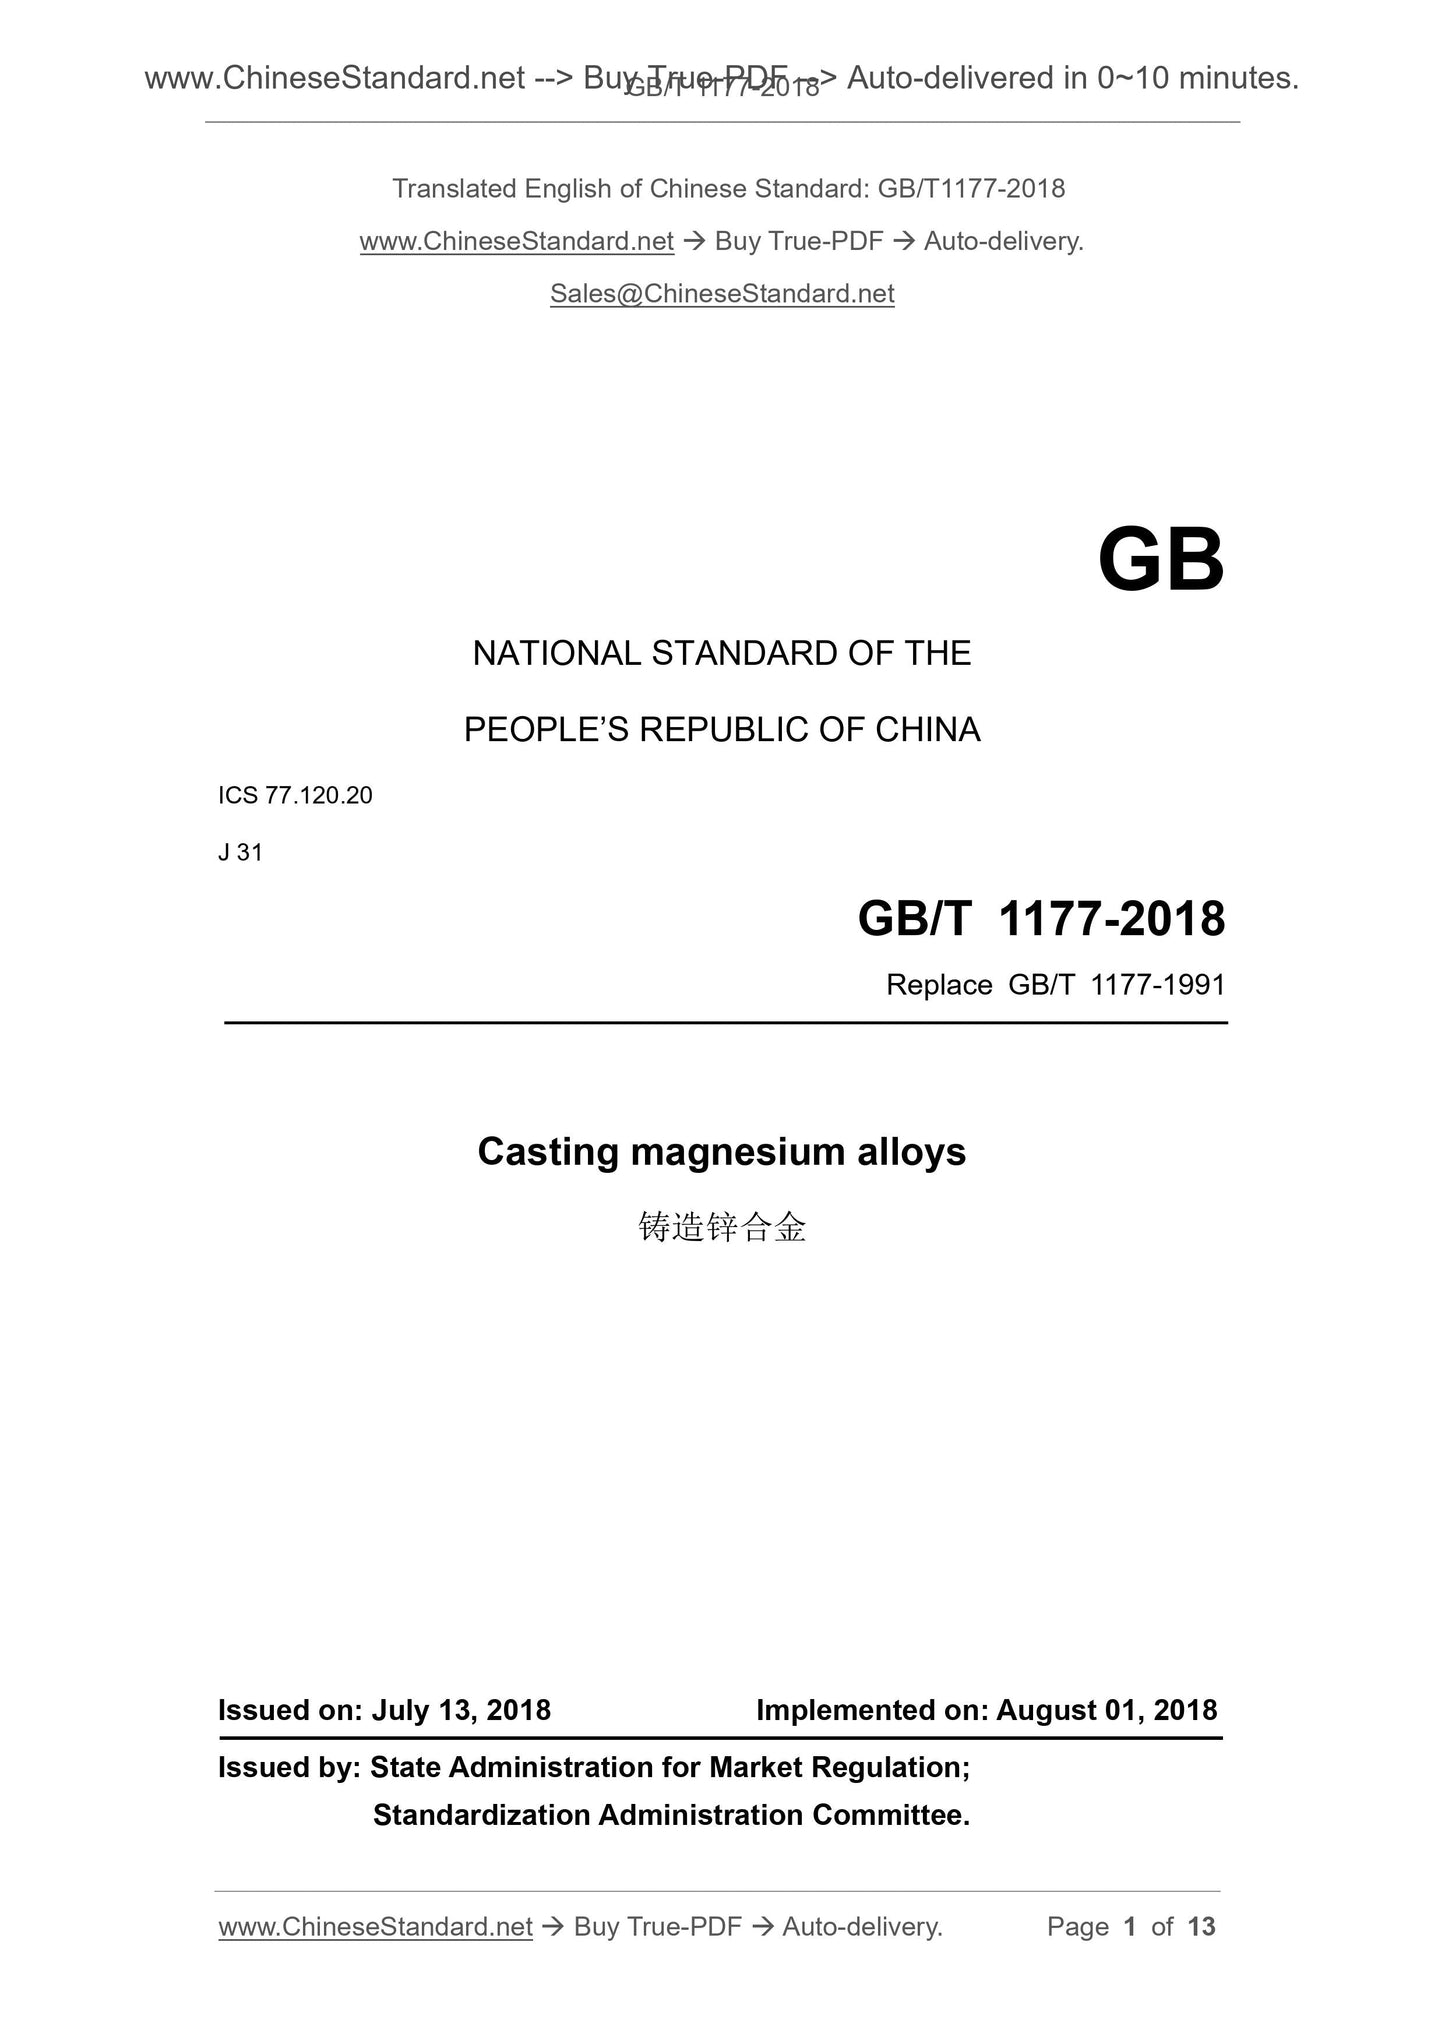 GB/T 1177-2018 Page 1